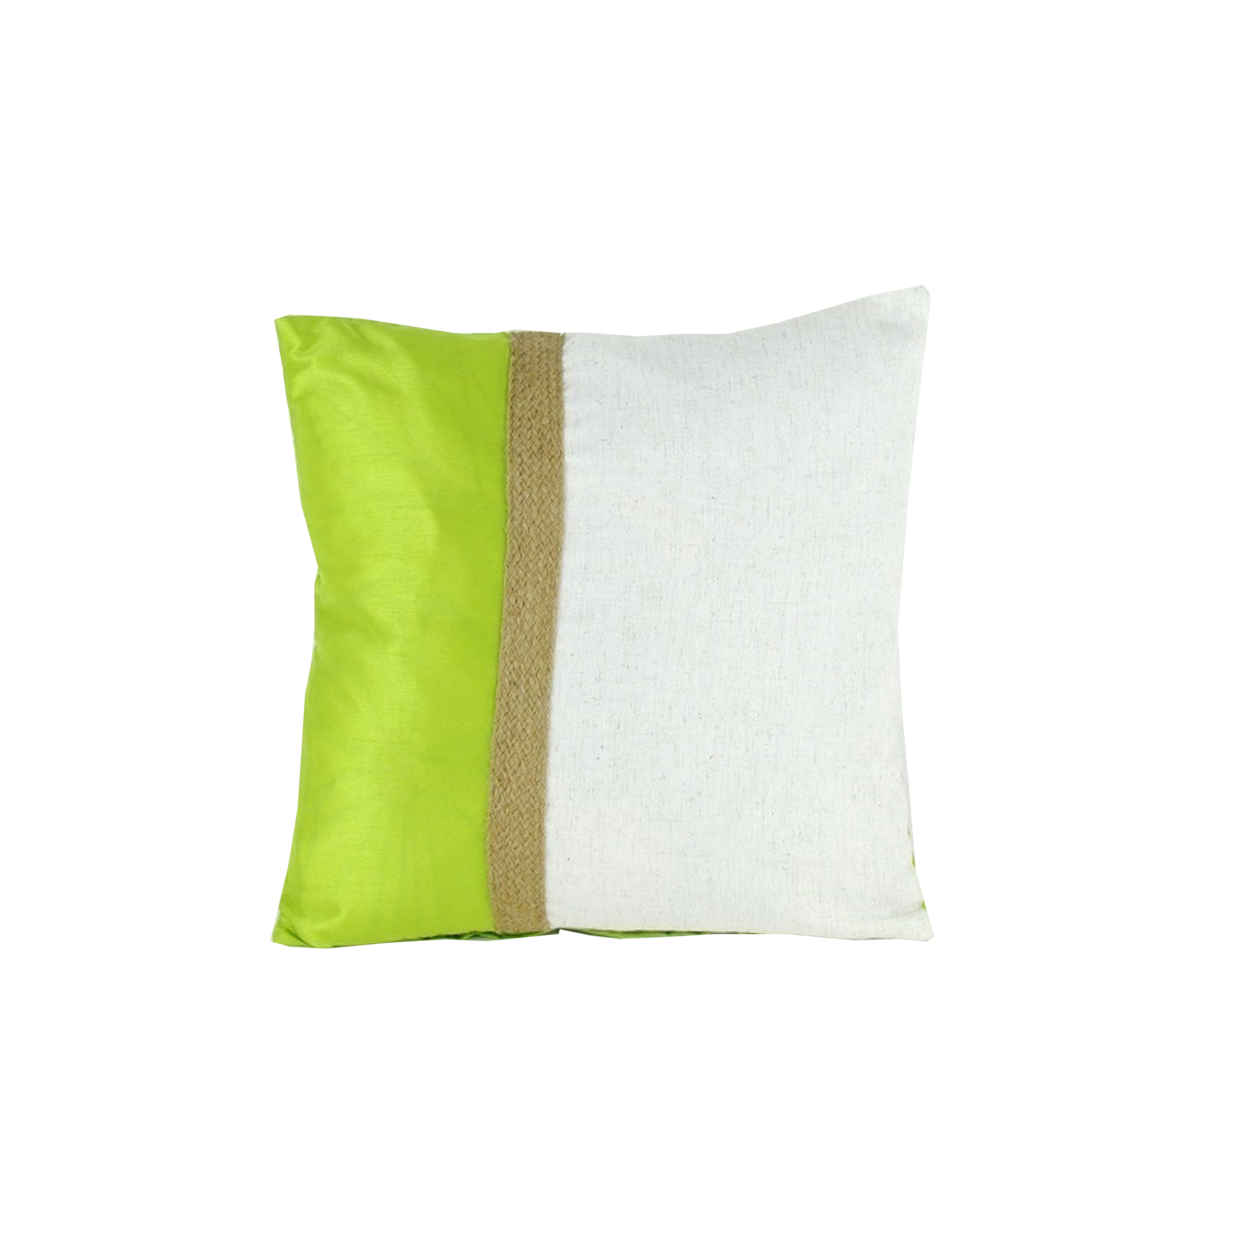 Fabric Accent Pillow With Jute Strip, White And Green- Saltoro Sherpi